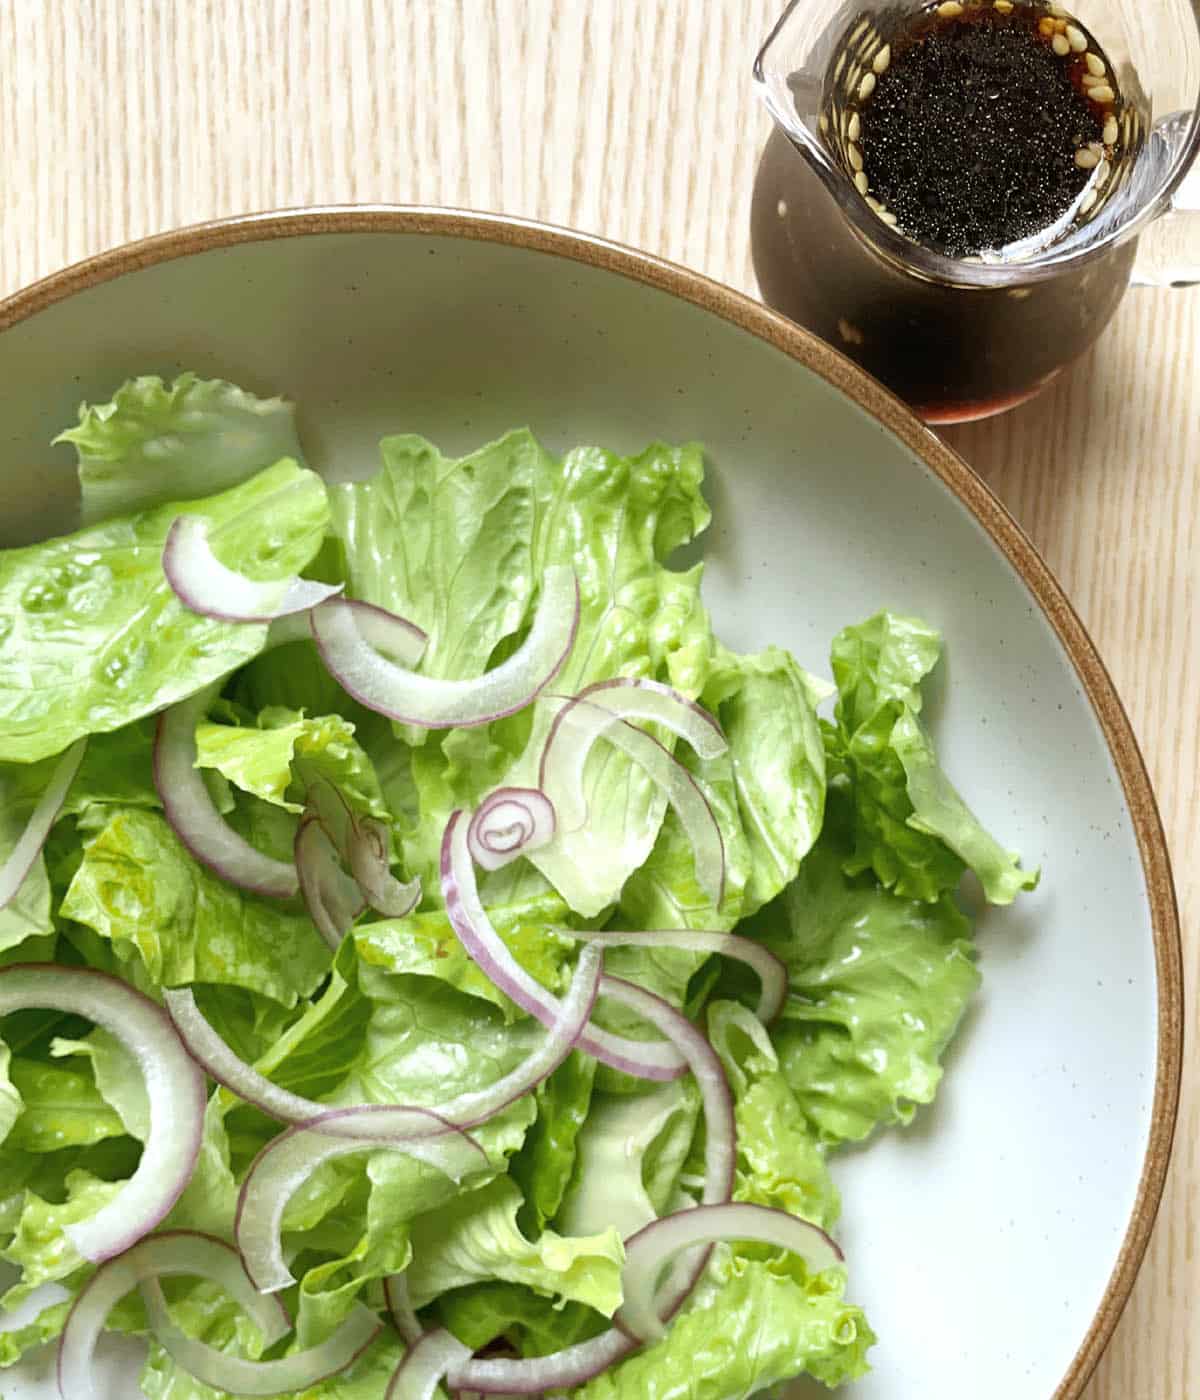 A small glass pitcher containing brown liquid, next to a round plate with a brown edge containing green lettuce leaves and thinly sliced red onion.